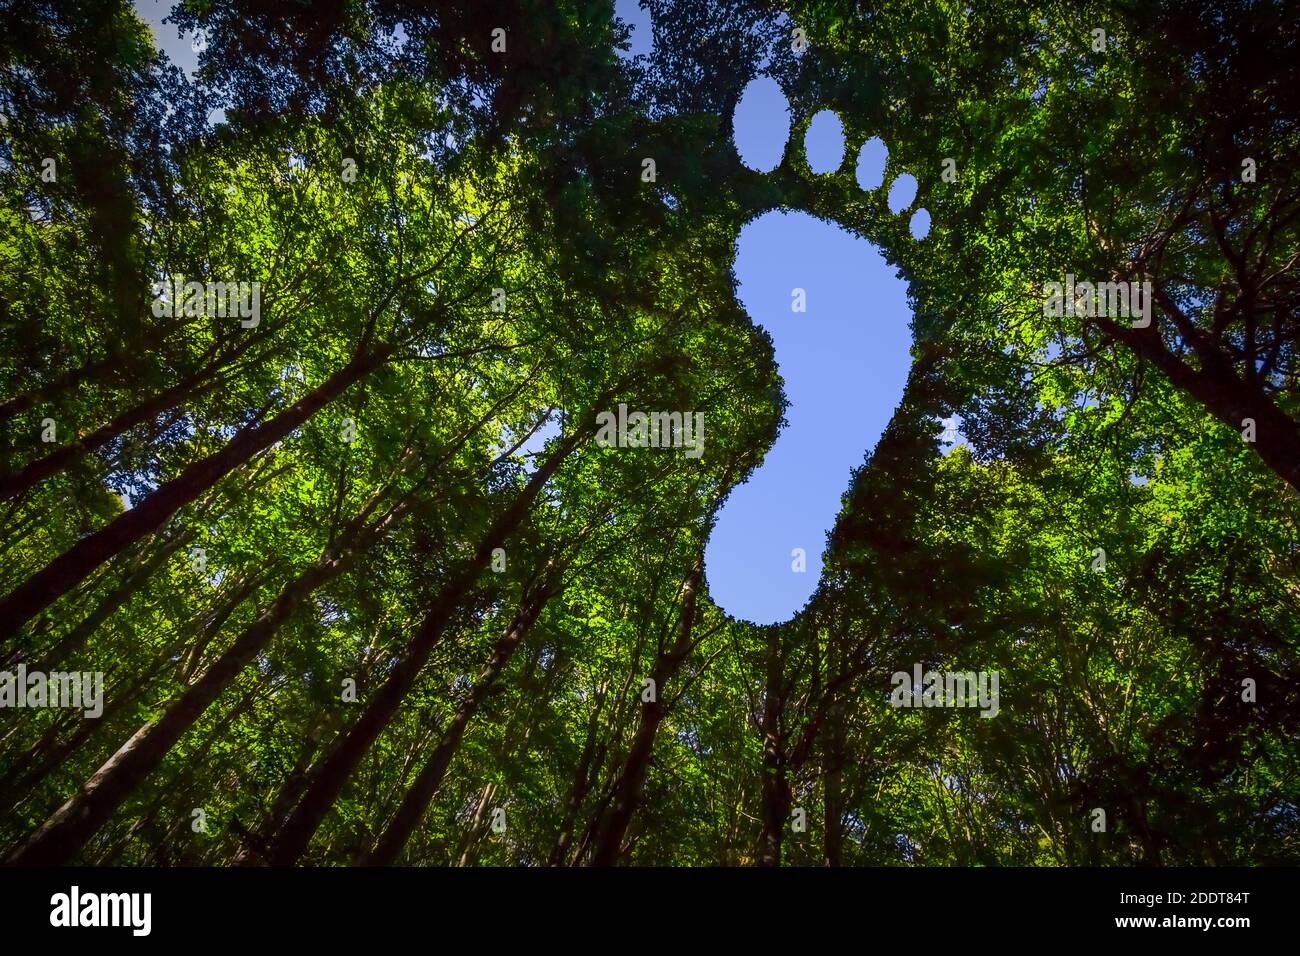 The Canopy of this Forest has Hole in the Shape of a Barefoot Footprint Stock Photo